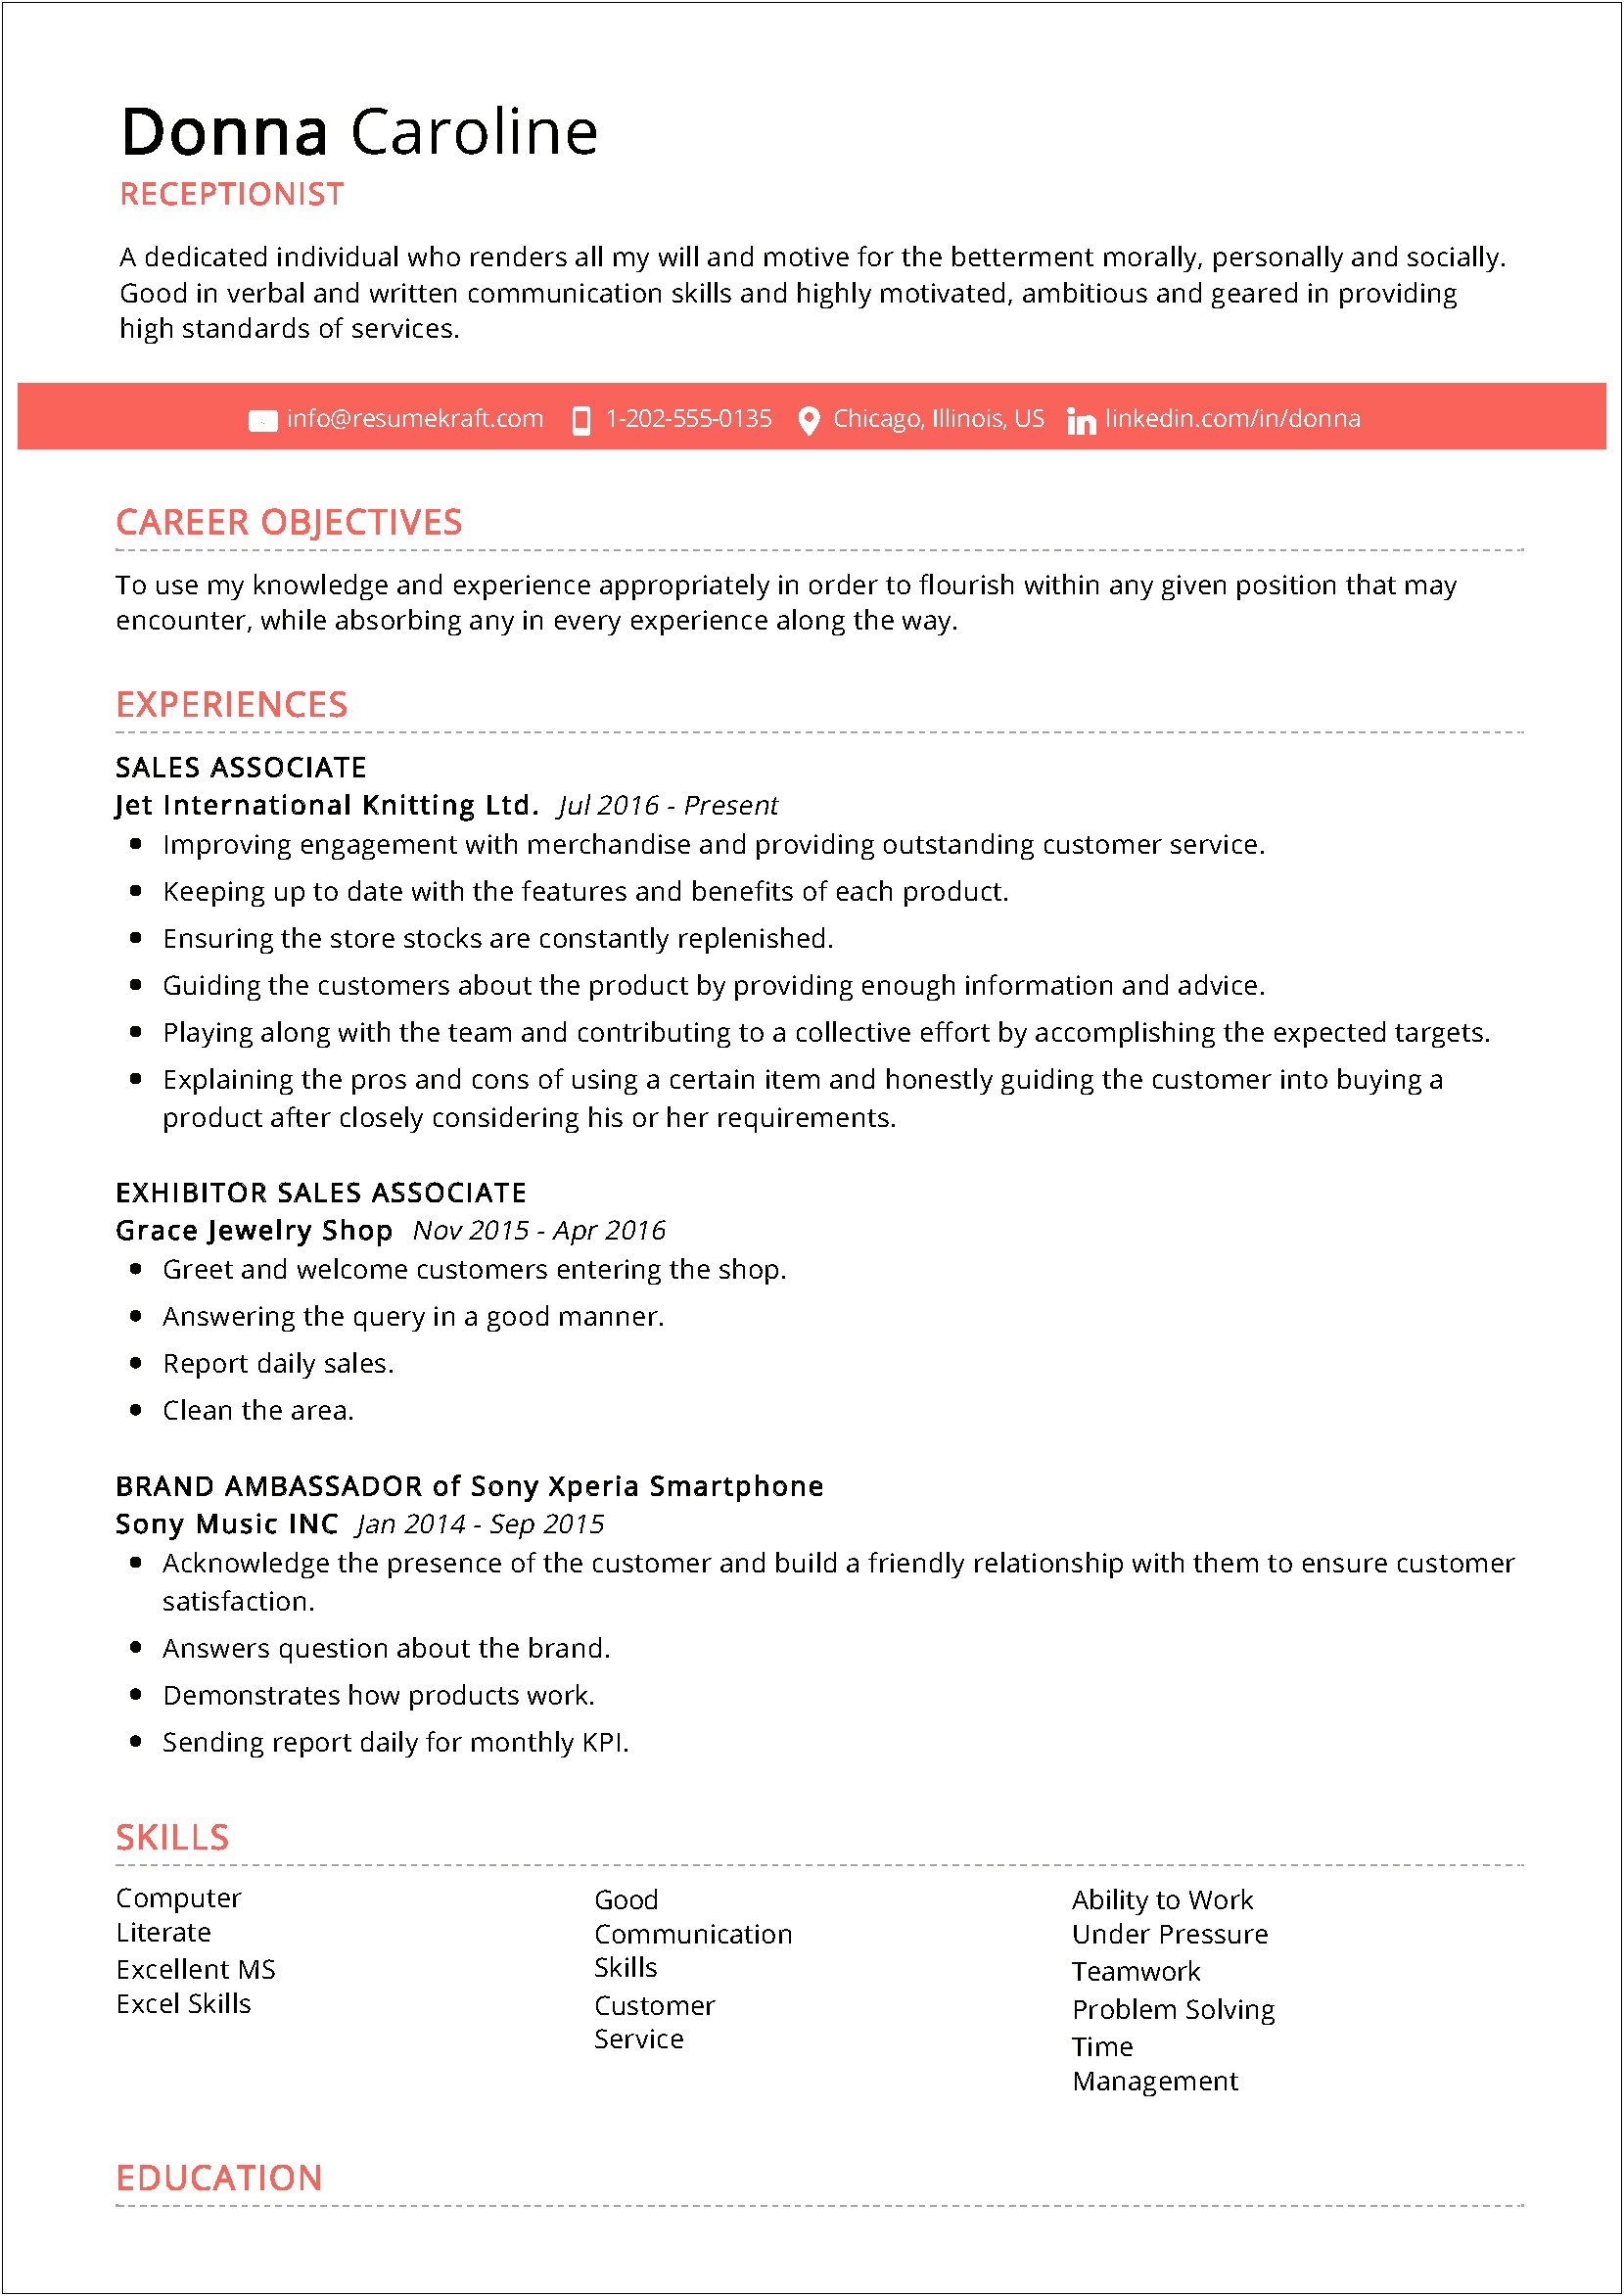 Resume Objective Samples For Receptionist